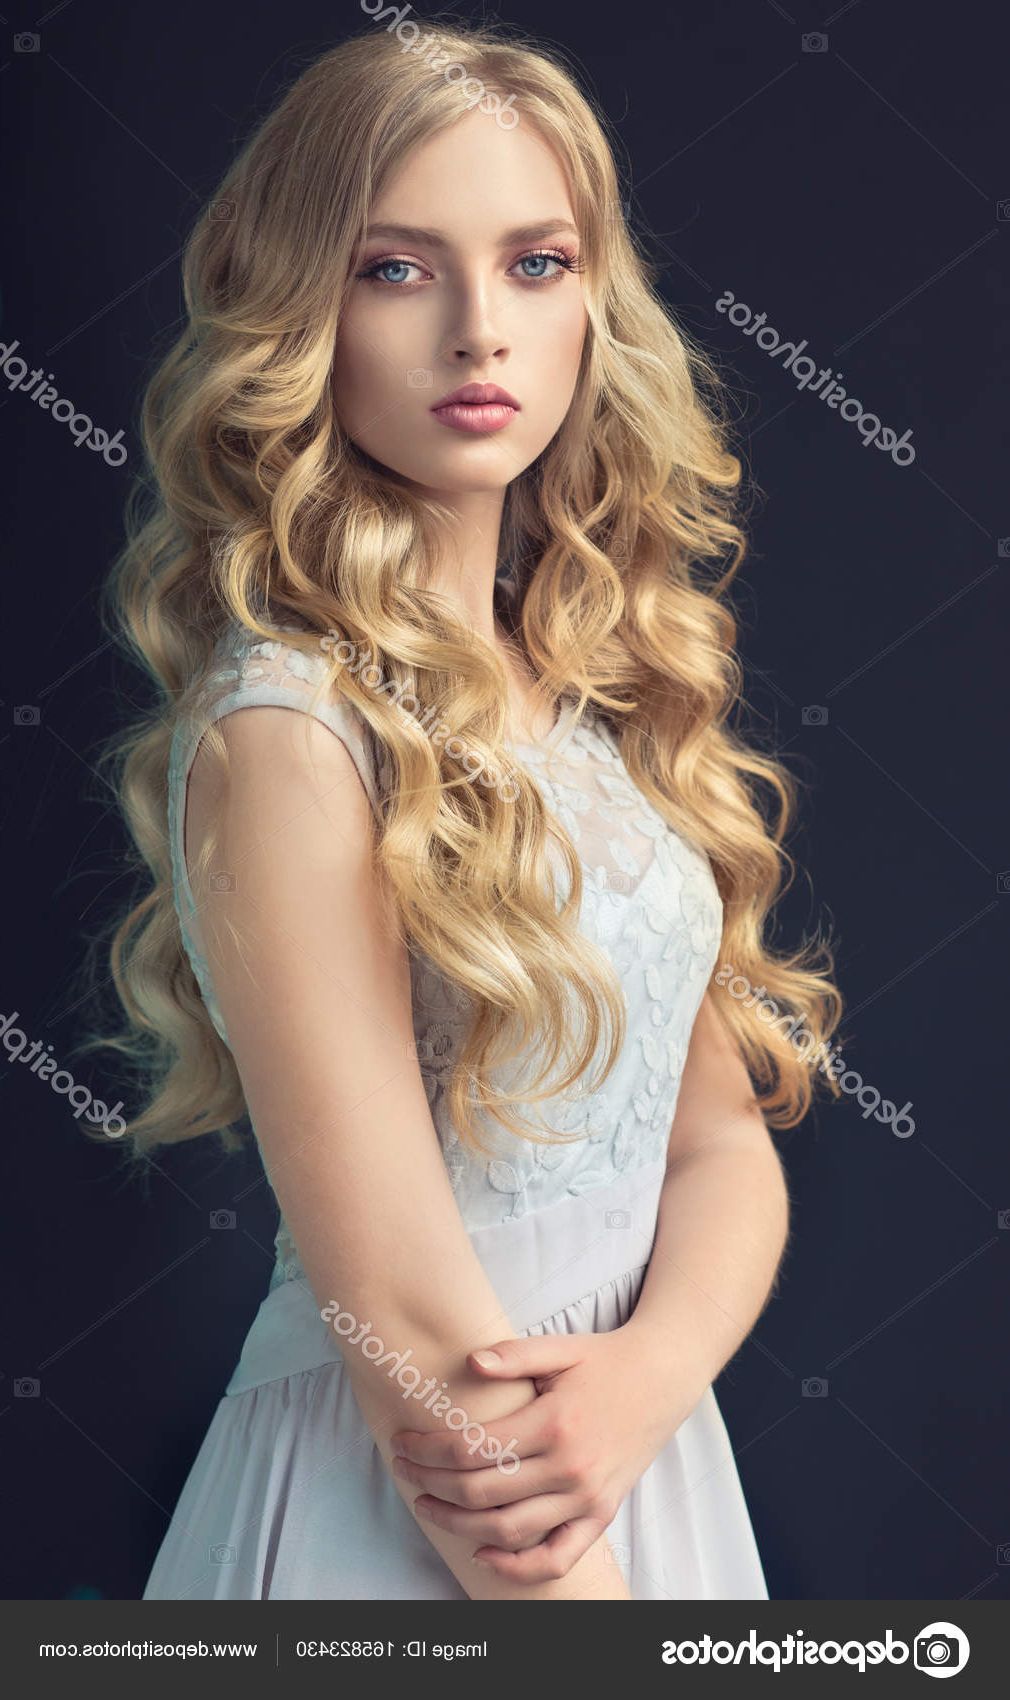 Well Known Shiny Tousled Curls Hairstyles In Blonde Girl With Long , Curly Hair — Stock Photo © Sofia Zhuravets (View 20 of 20)